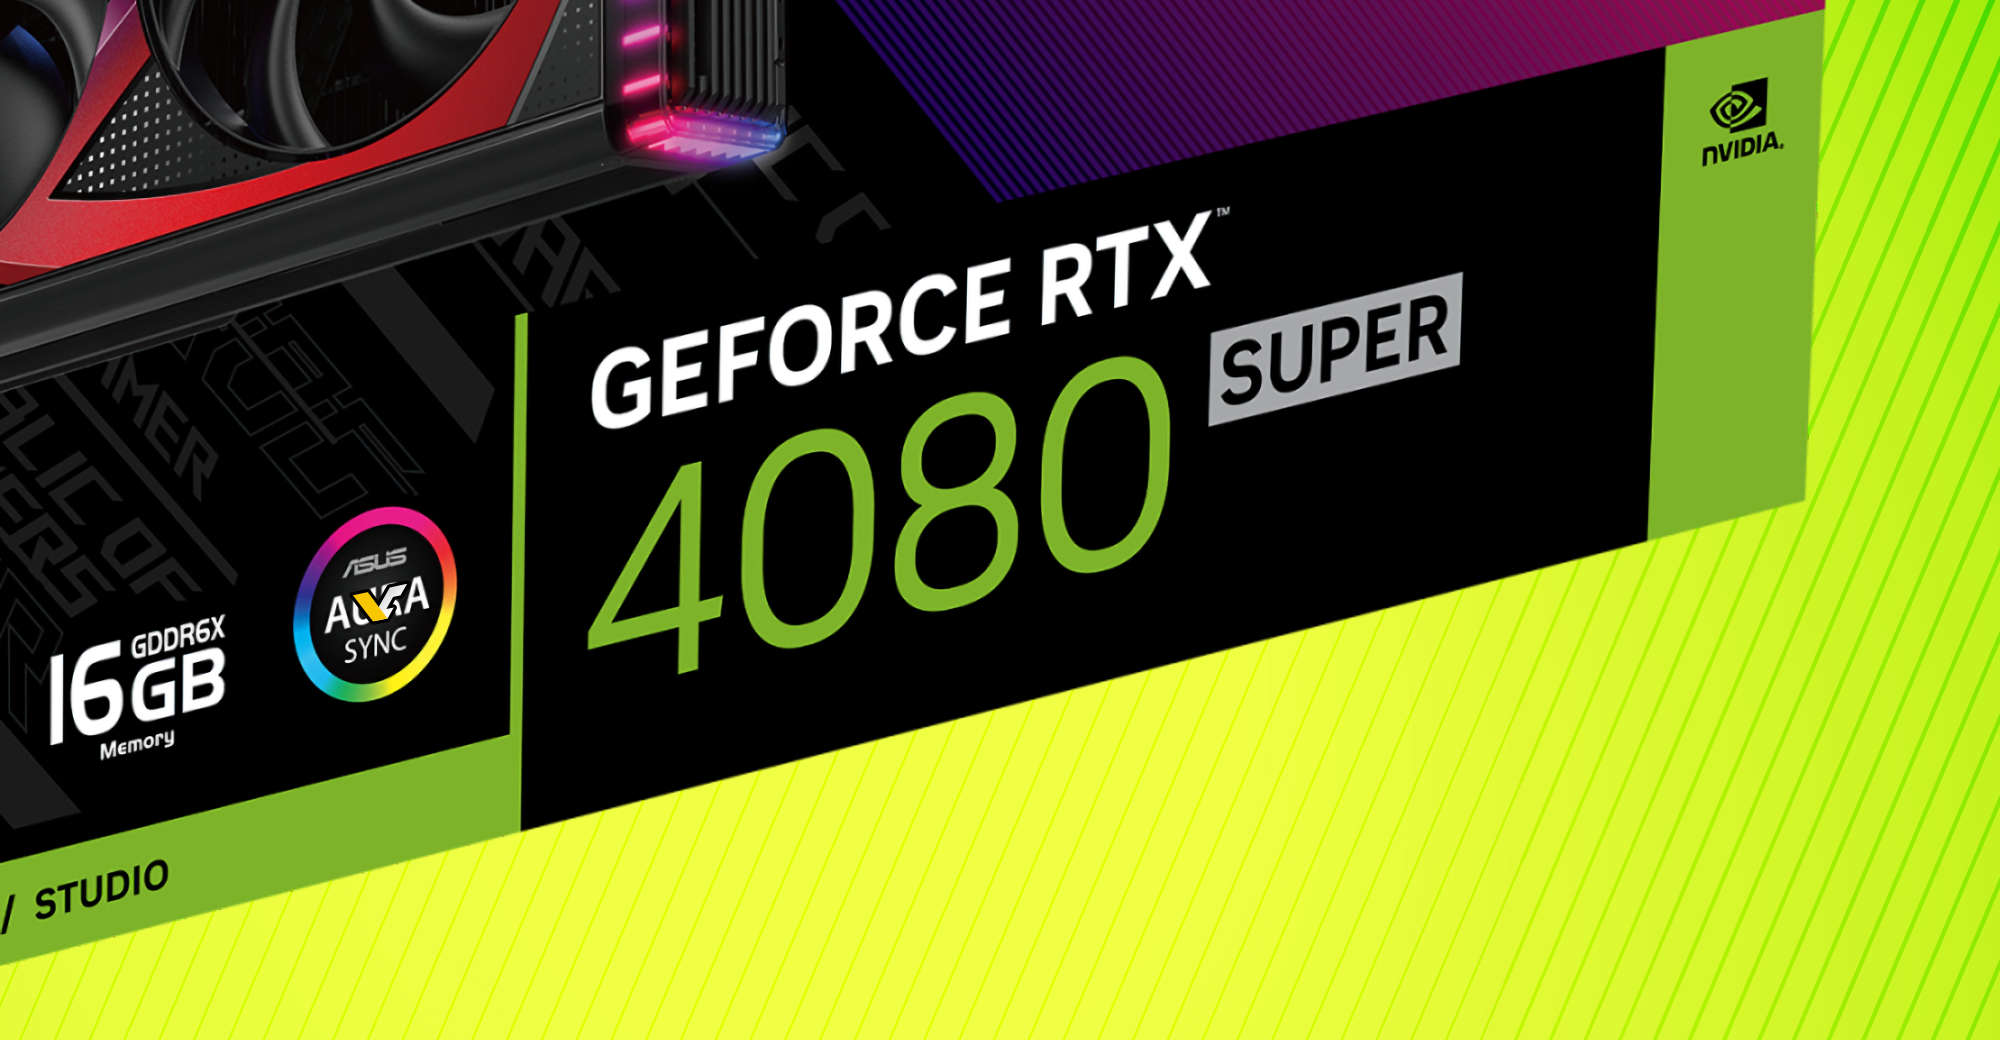 Reviewers begin testing the GeForce RTX 4080 SUPER, and the first benchmarks have been spotted